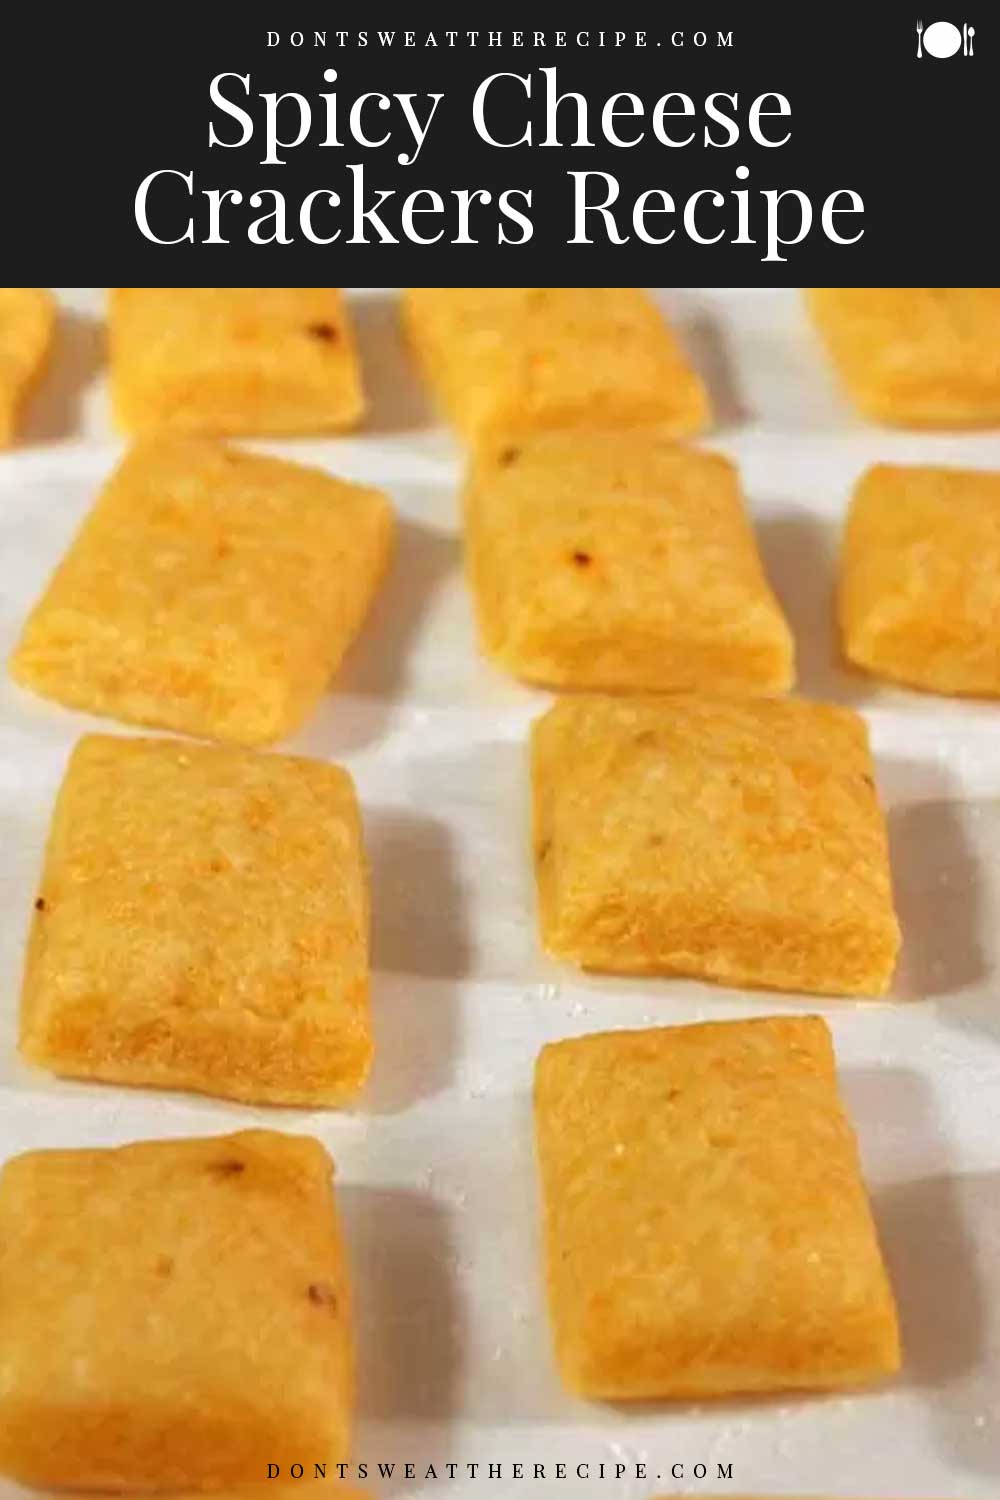 Spicy Cheese Crackers Recipe (from scratch) - Don't Sweat The Recipe